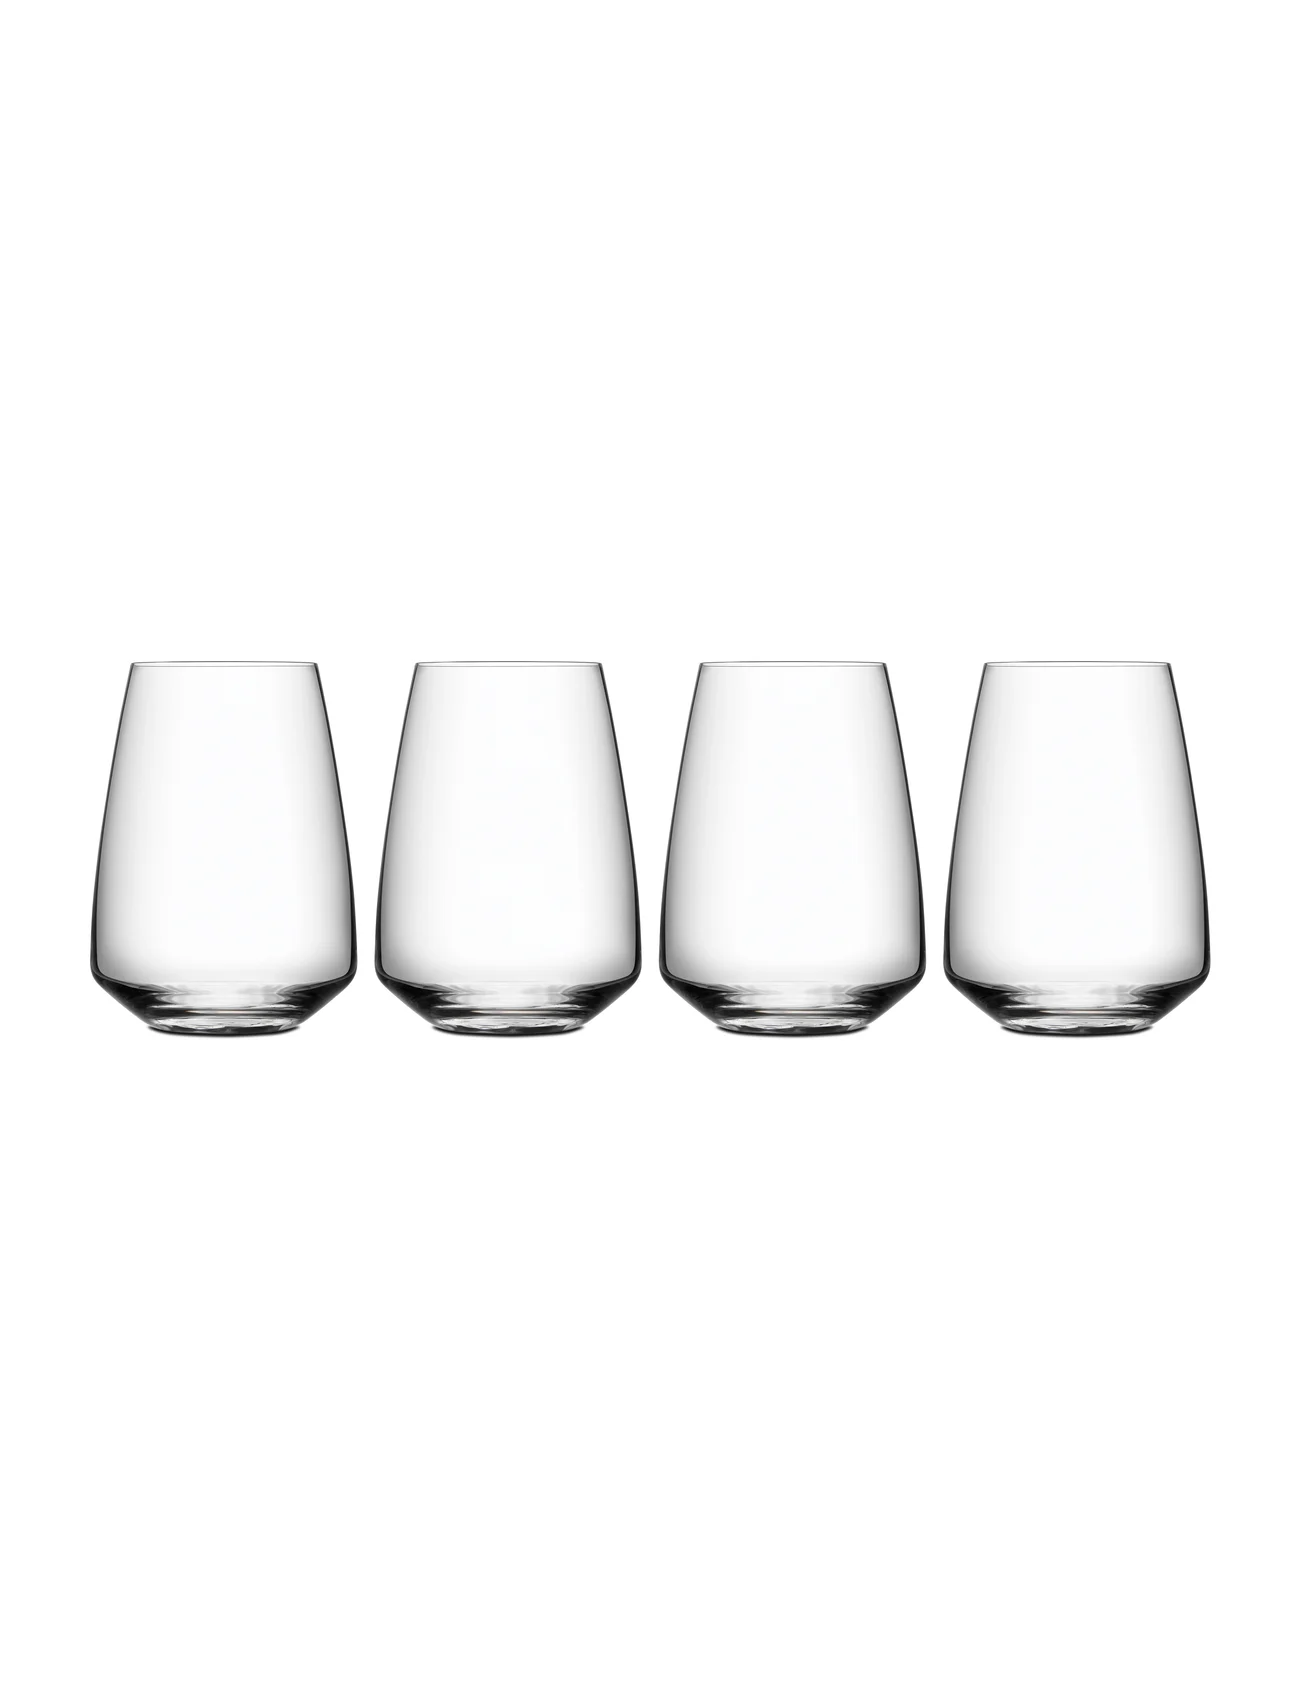 Orrefors - PULSE TUMBLER 4-PACK 35CL - drinking glasses & tumblers - clear - 0